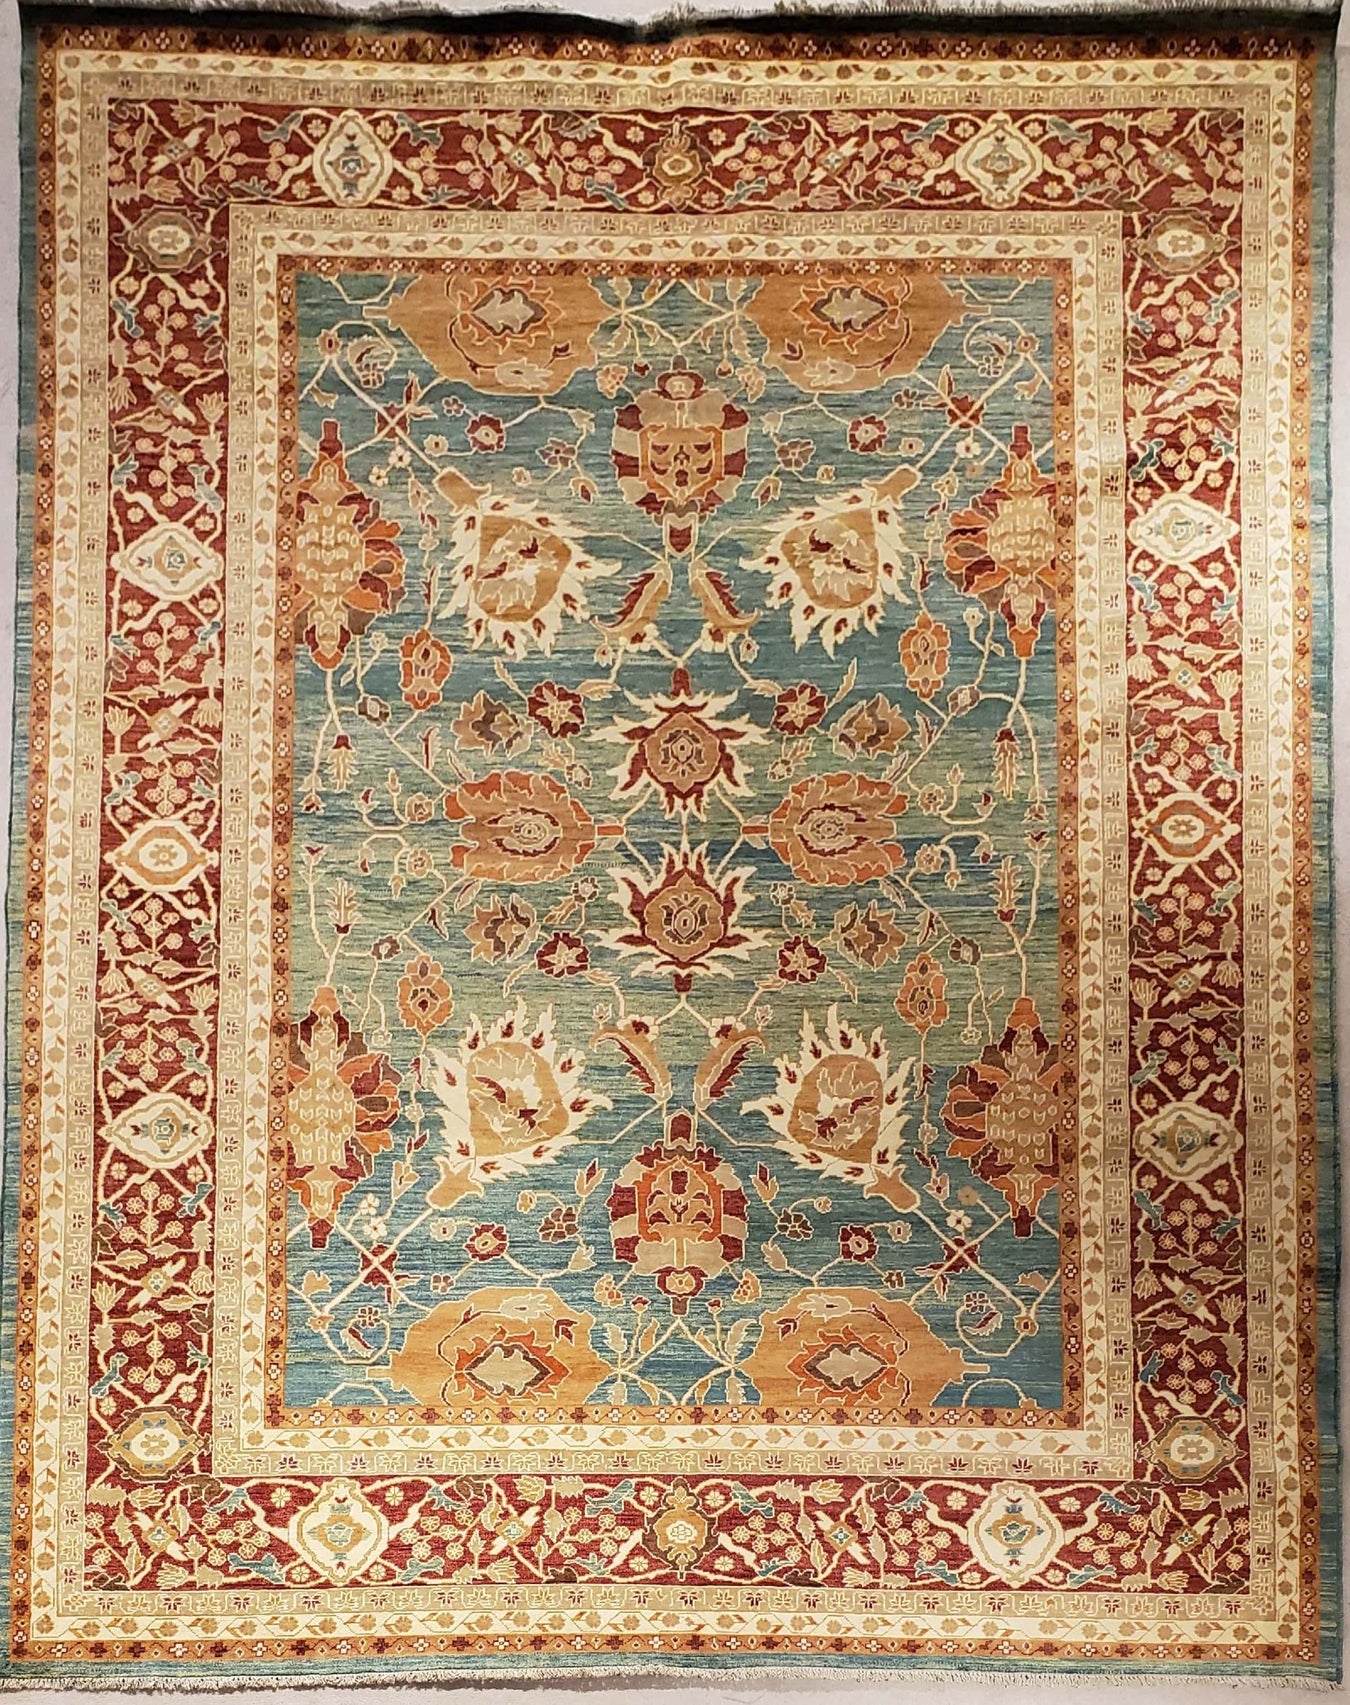 HAND-KNOTTED RUGS